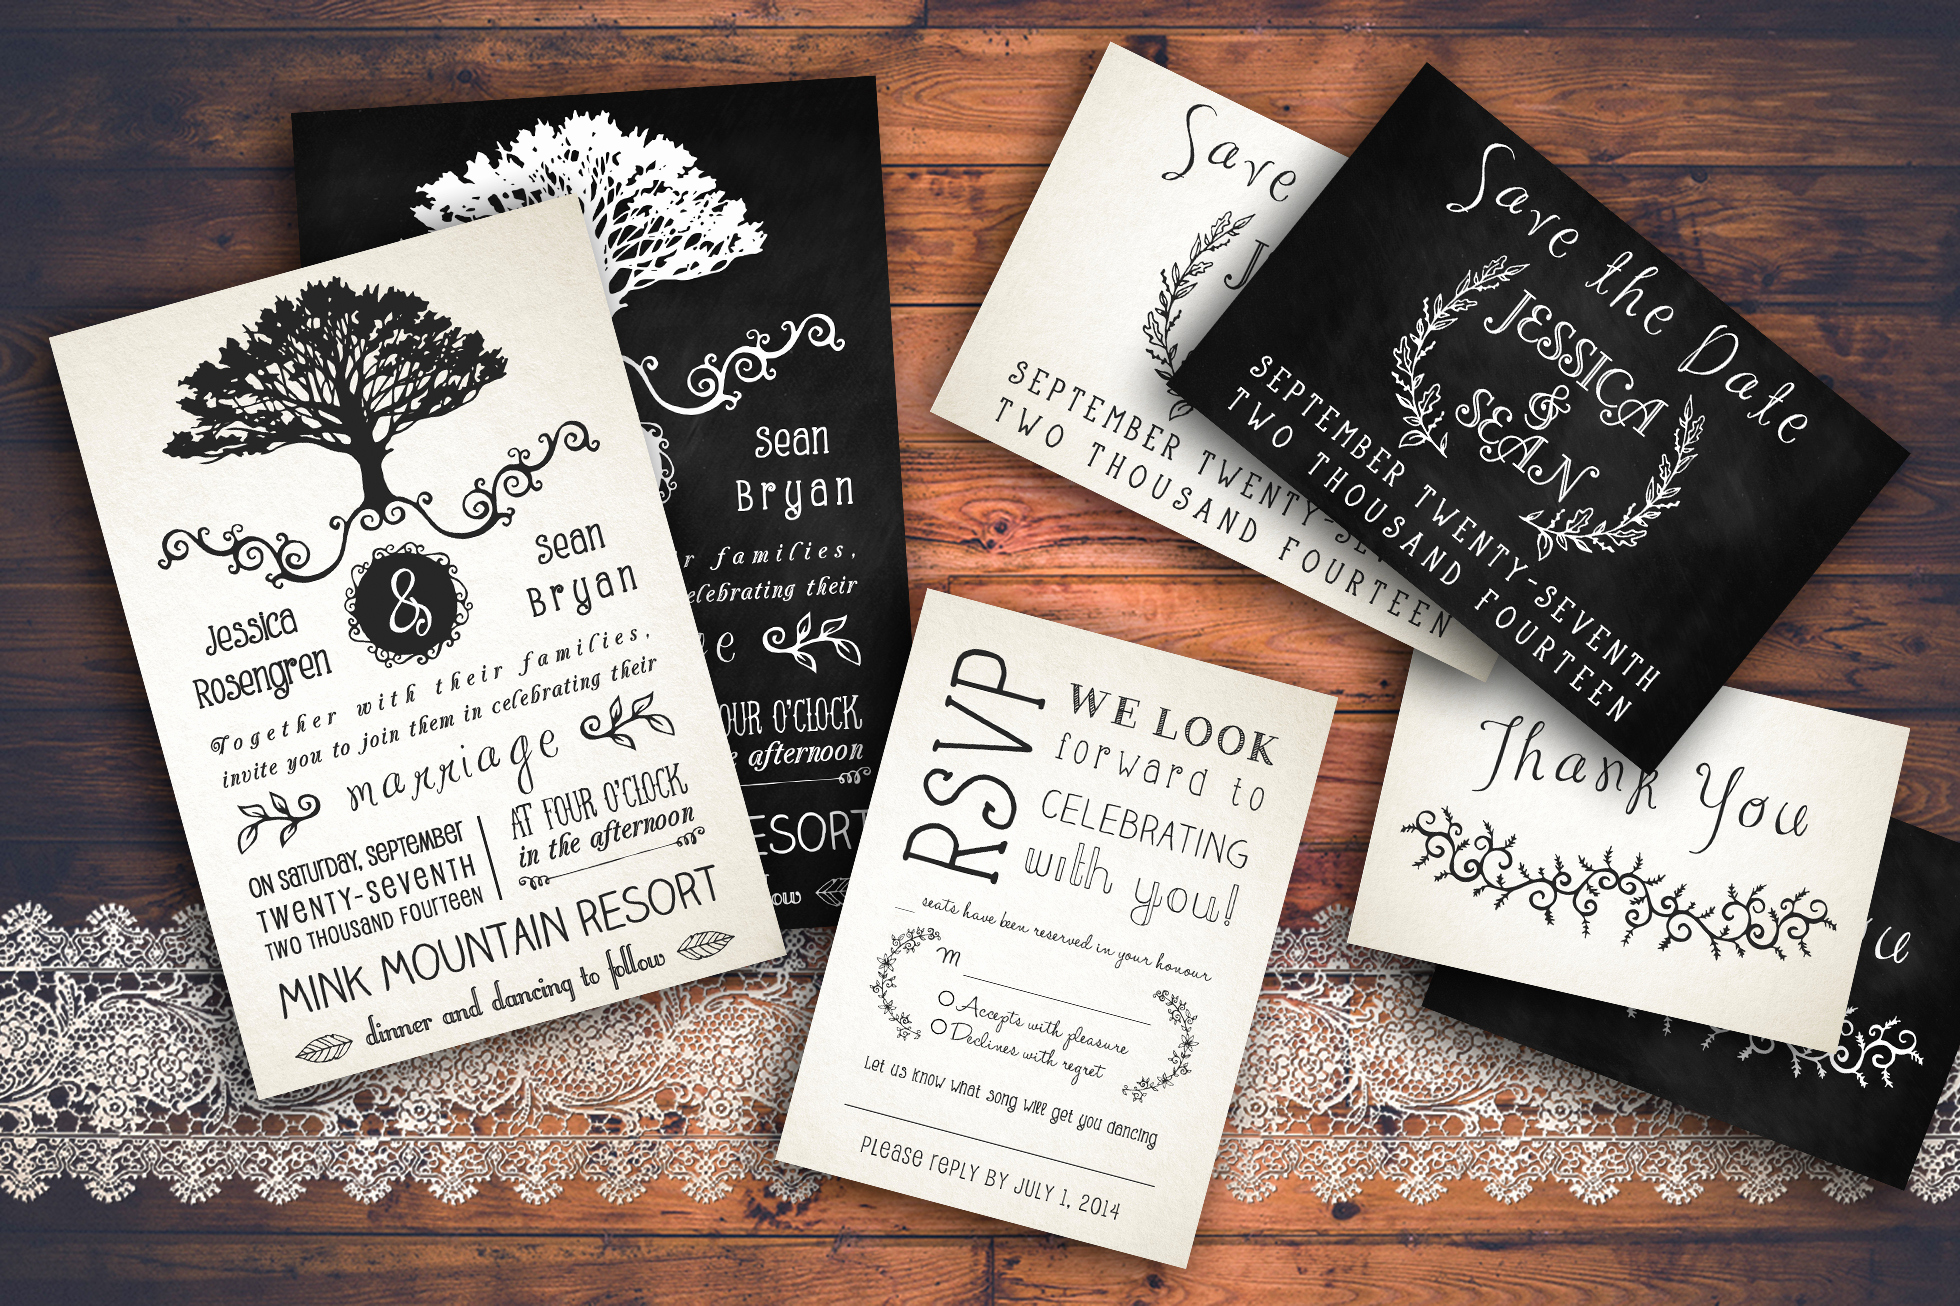 Rustic Wedding Invites Templates Awesome Rustic Wedding Invitation Pack Invitation Templates On